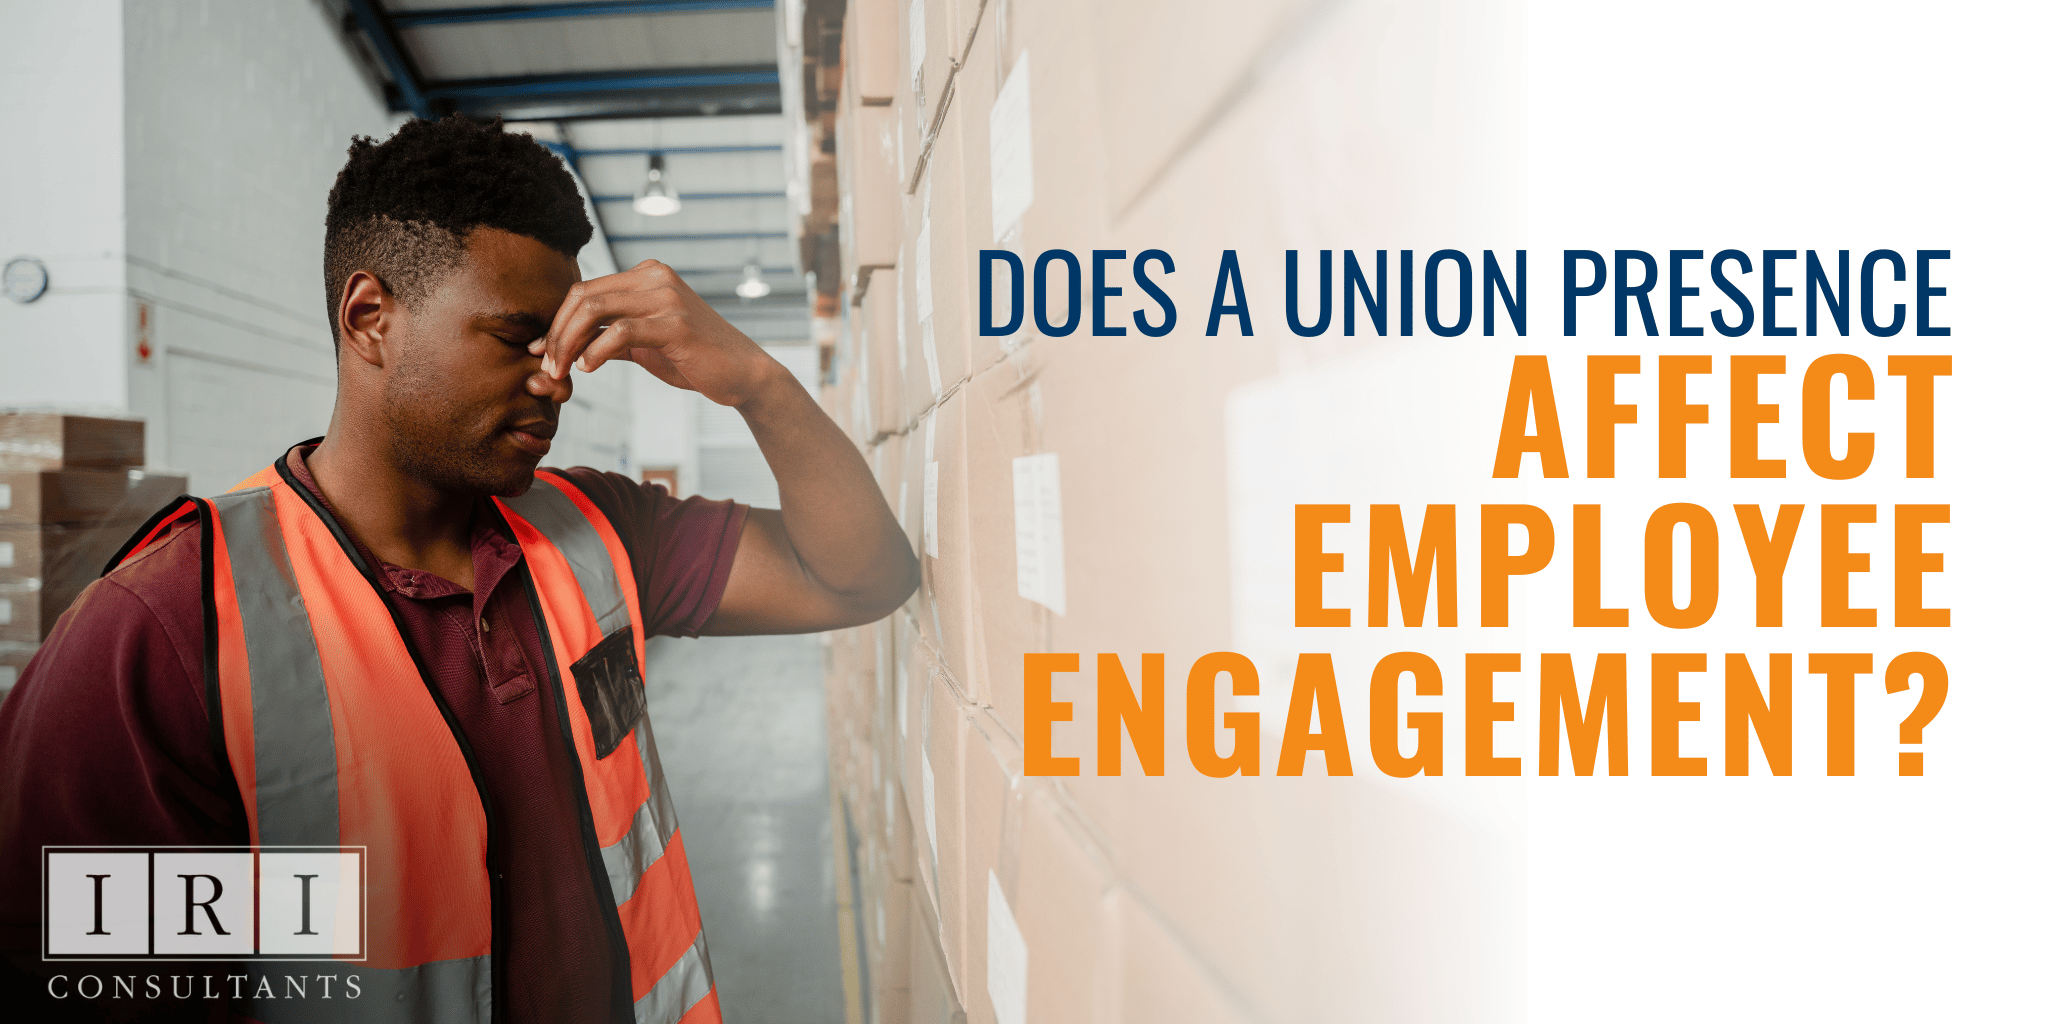 Does A Union Presence Affect Employee Engagement